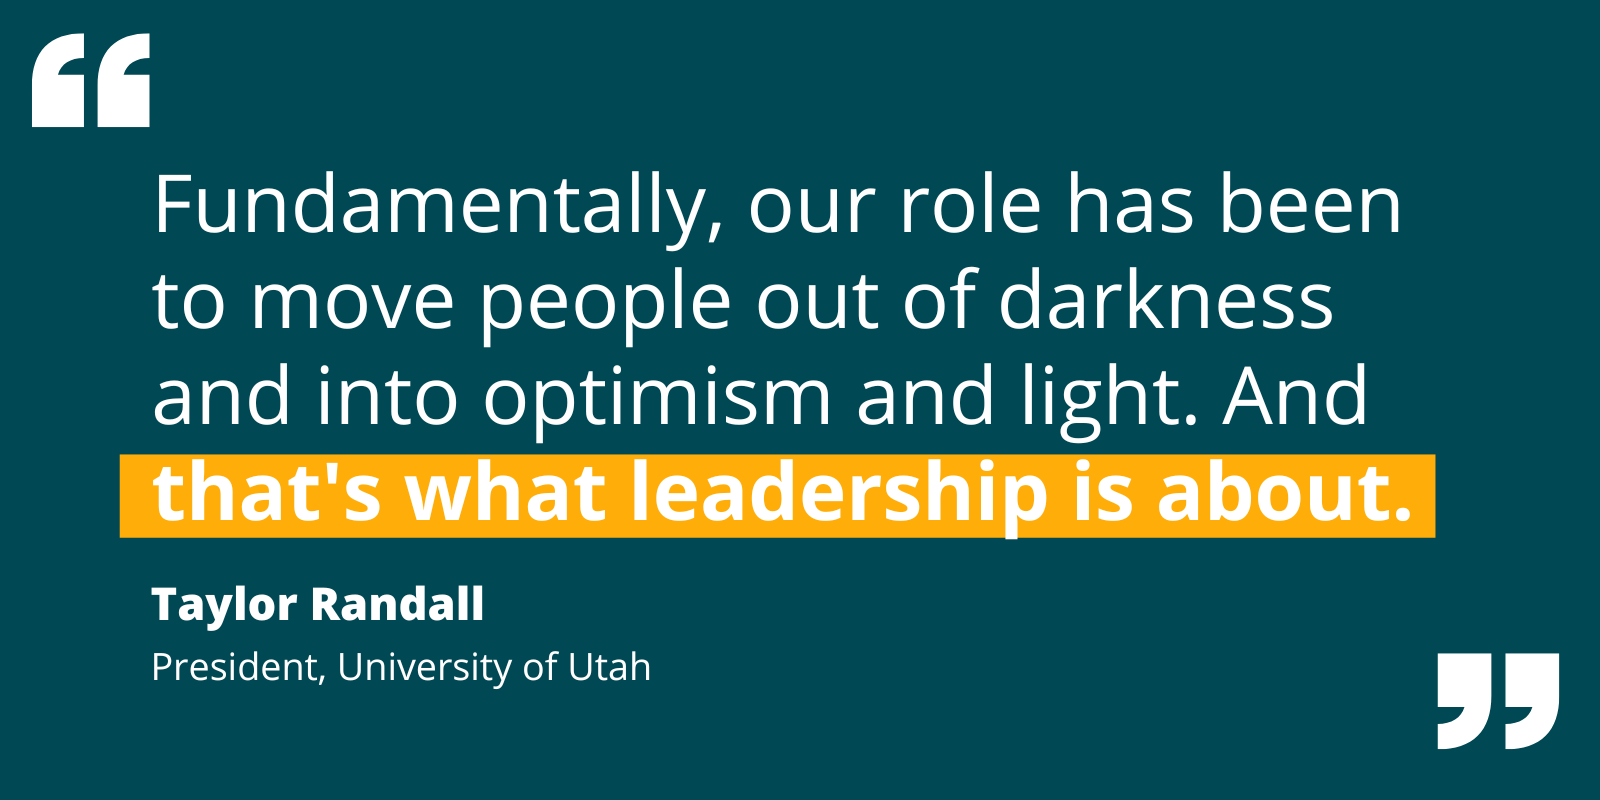 Quote by Taylor Randall re: leadership's fundamental role of moving people out of darkness and into optimism and light.